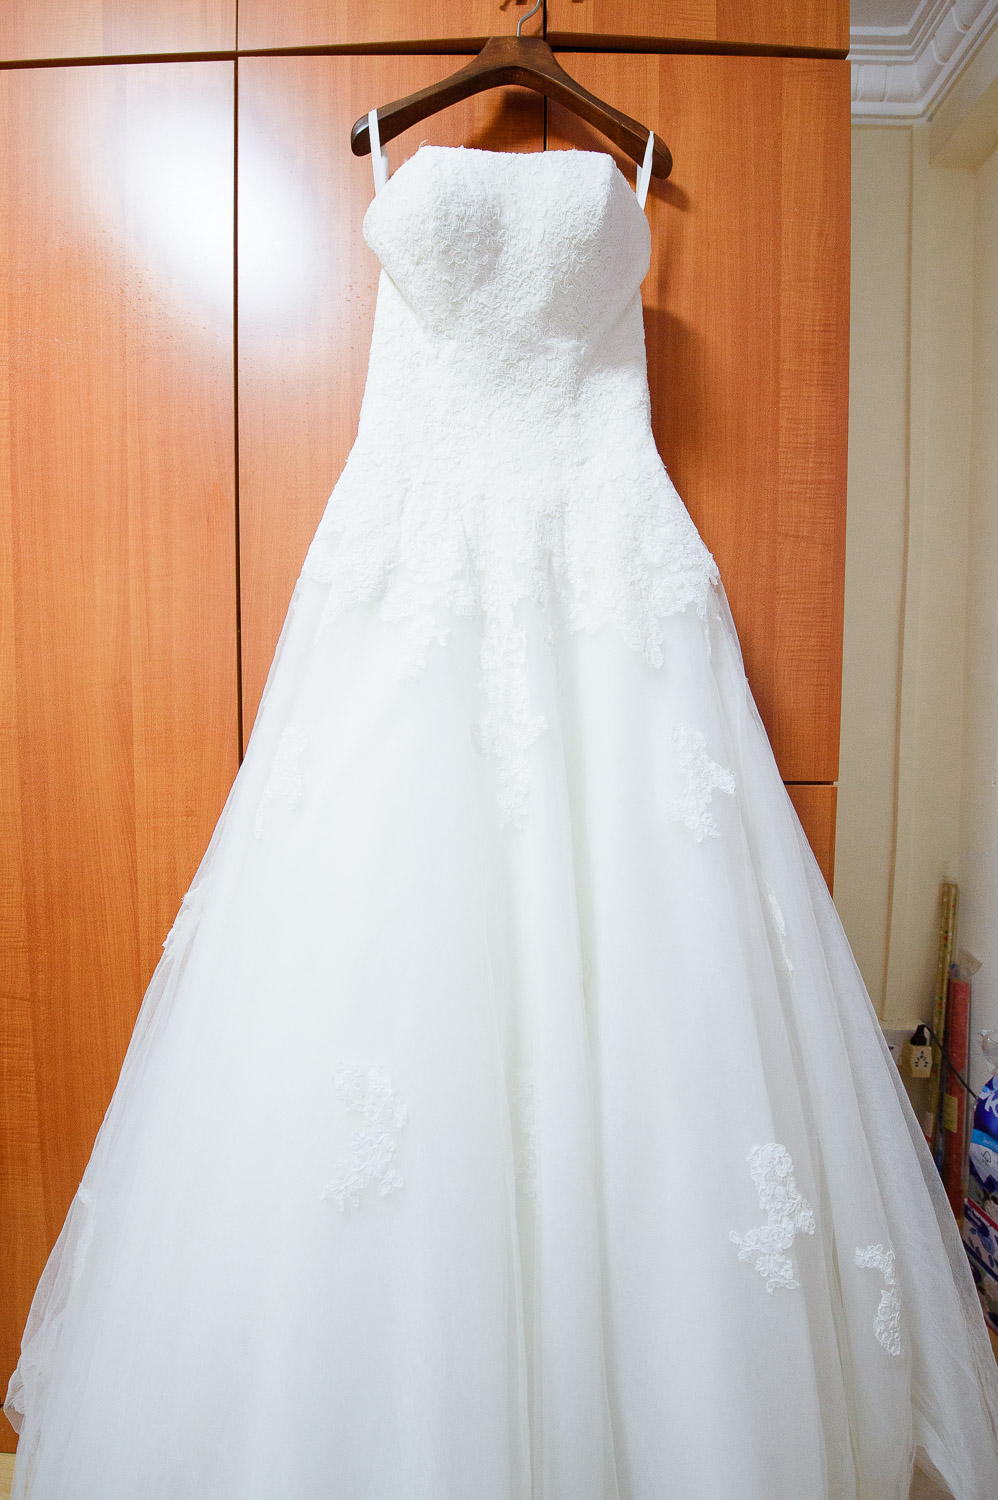 The wedding gown 